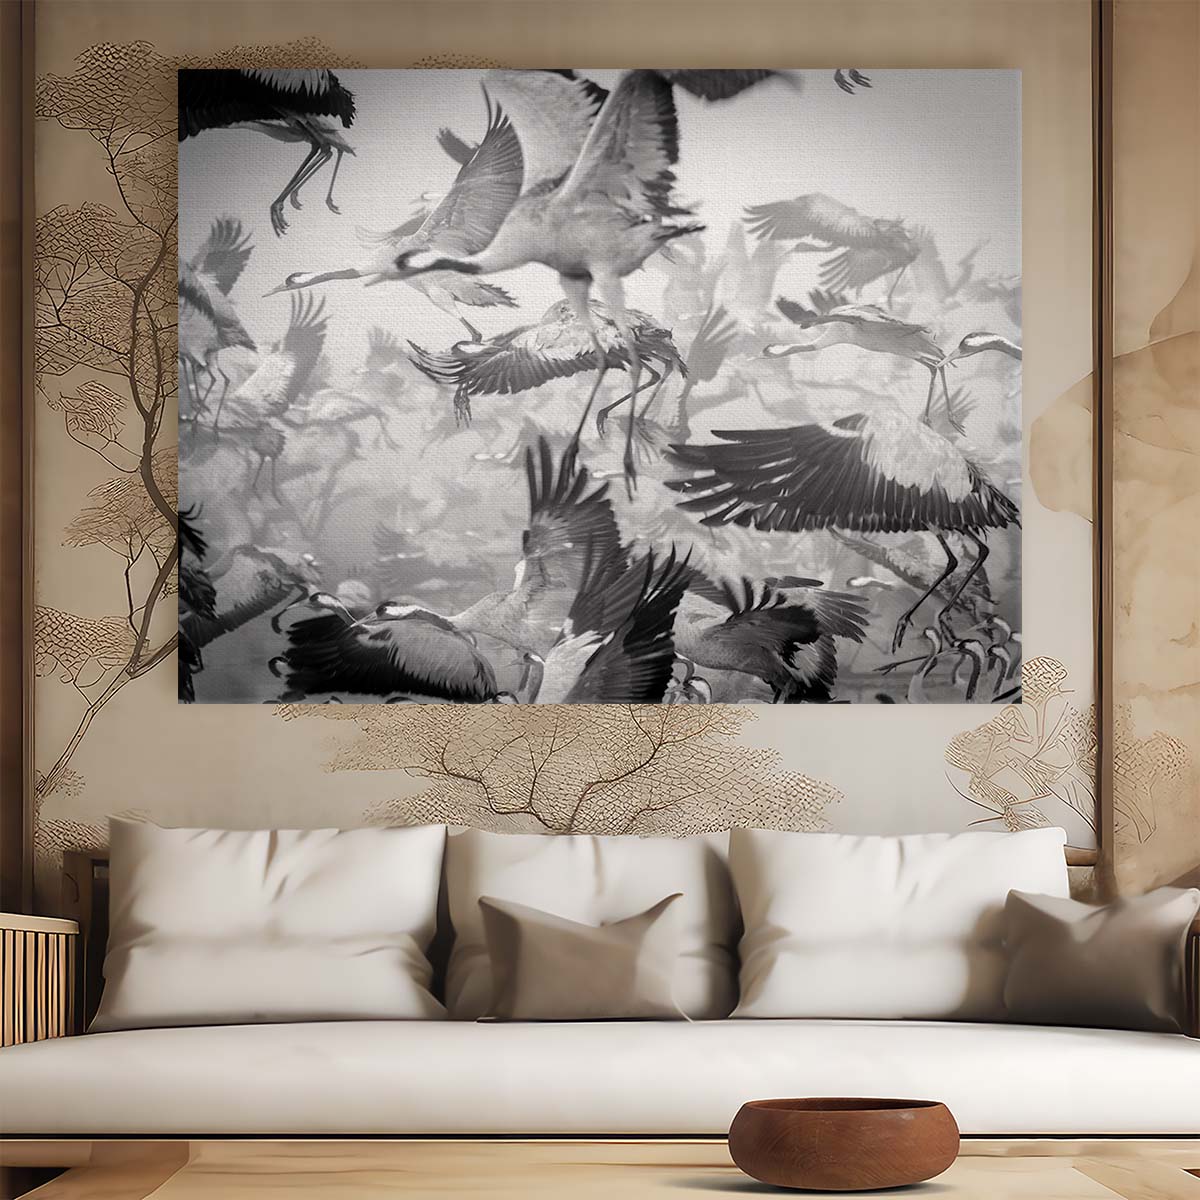 Misty Crane Migration Over Chula Lake Wall Art by Luxuriance Designs. Made in USA.